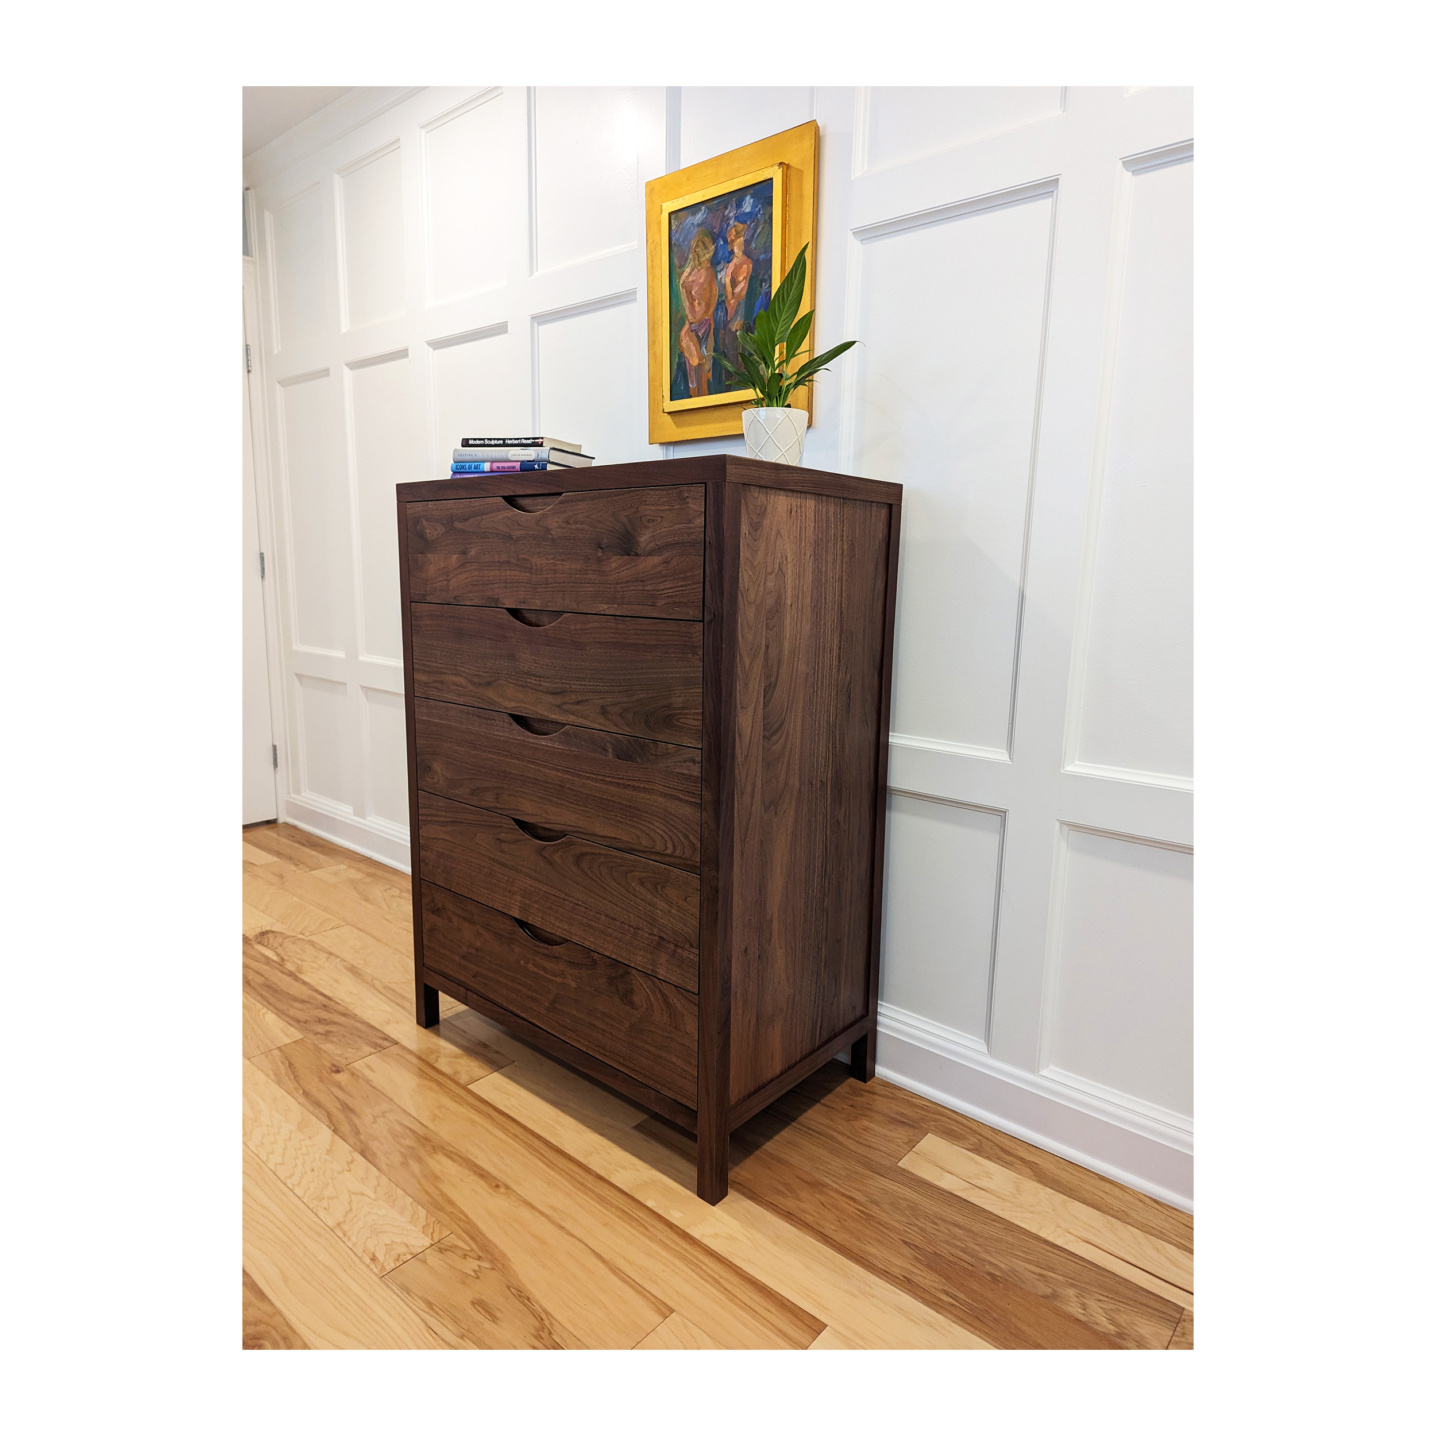 Wooden chest of drawers made with solid hardwoods